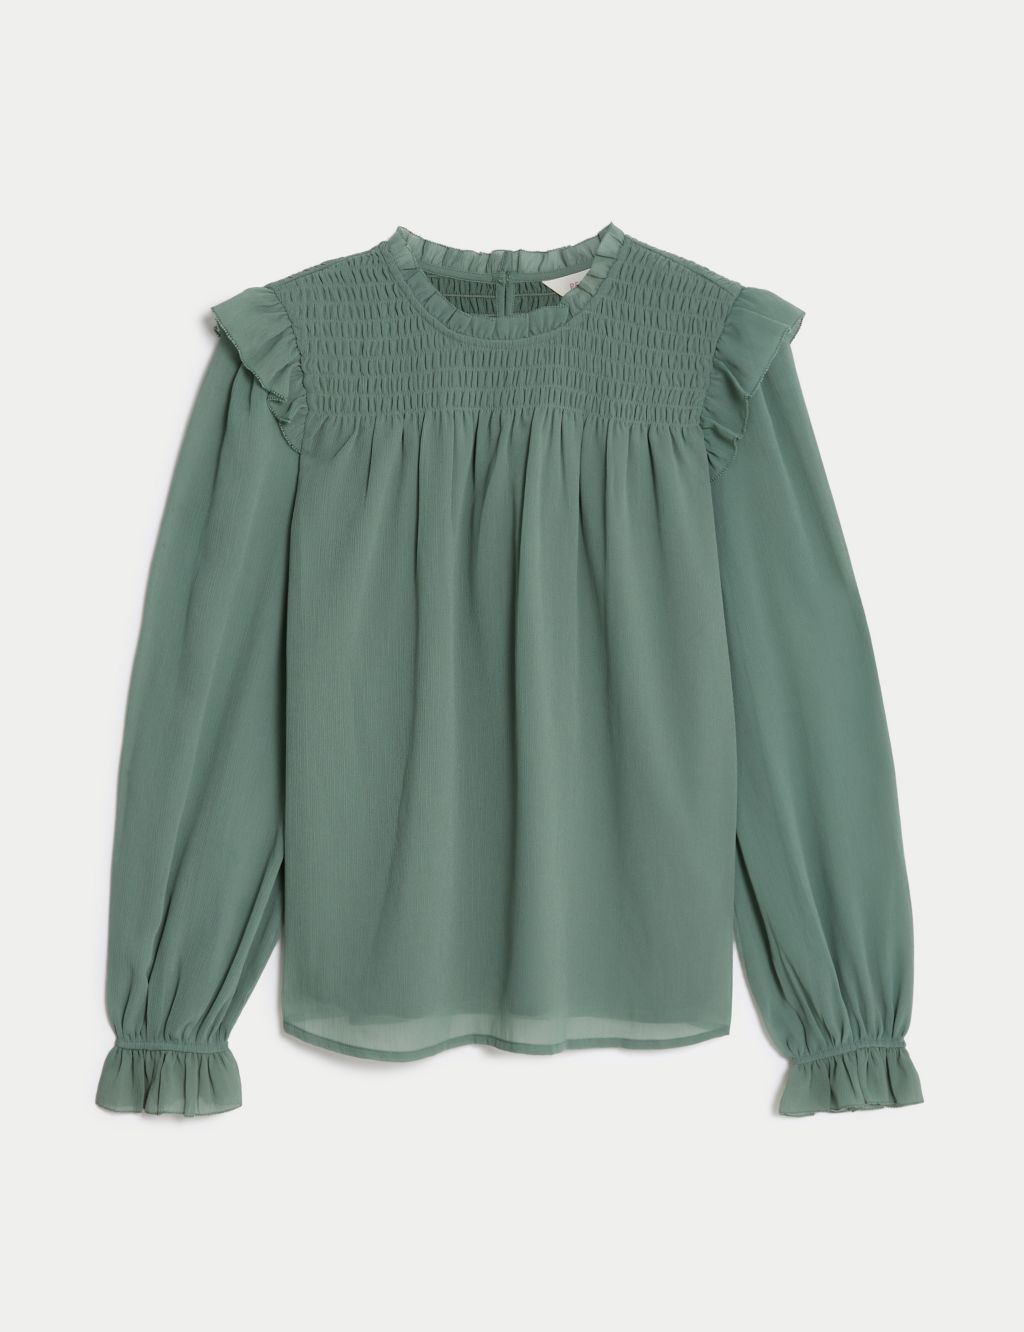 Shirred High Neck Frill Detail Blouse image 2